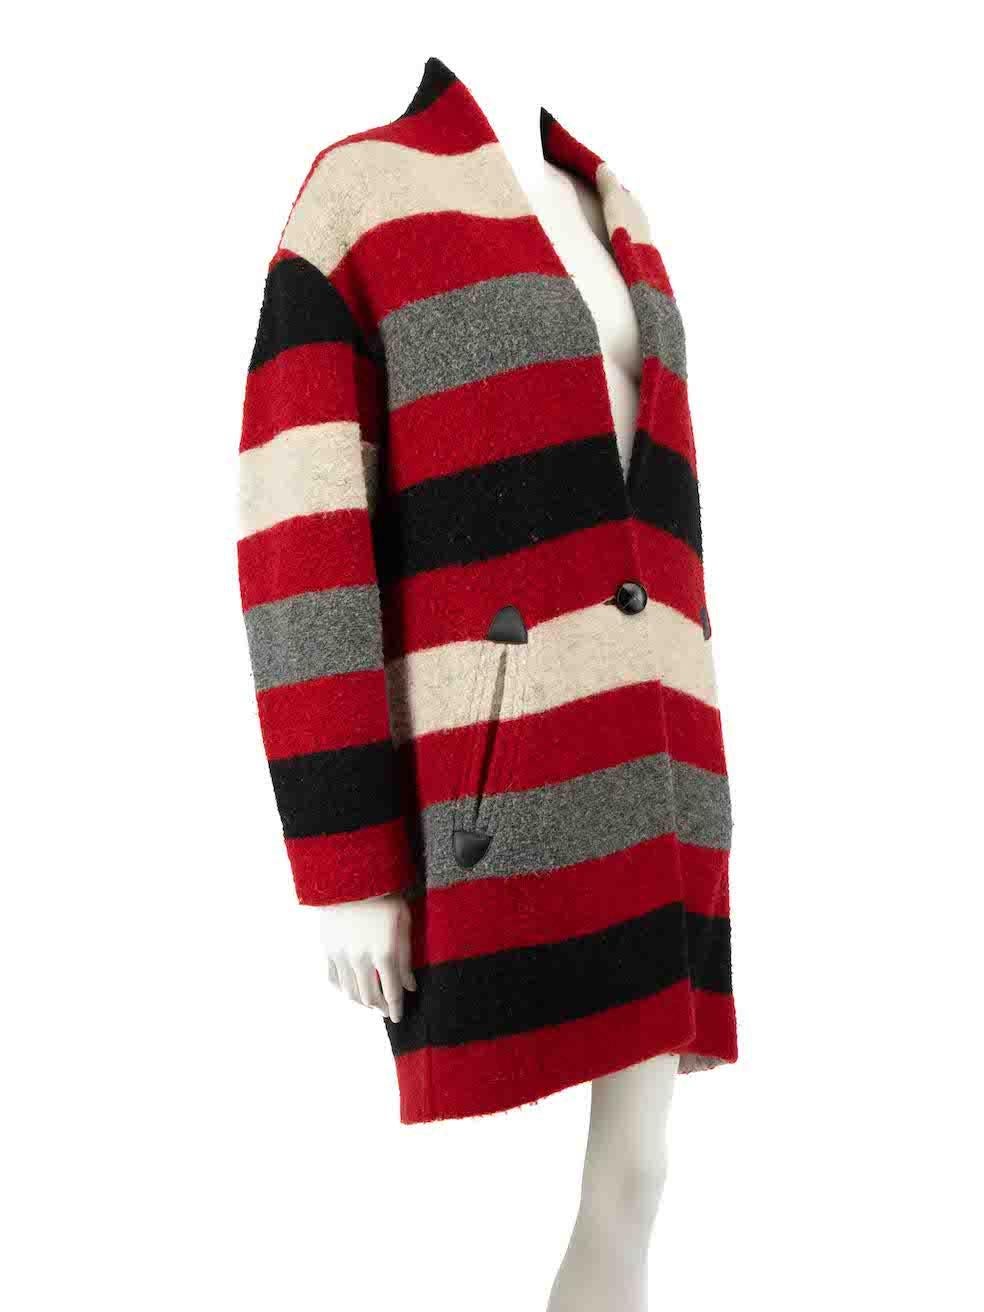 CONDITION is Good. General wear to coat is evident. Moderate signs of wear to the texture with pilling at the front, back and sleeves on this used Isabel Marant Etoile designer resale item.
 
Details
Gabriel model
Multicolour
Wool
Mid length